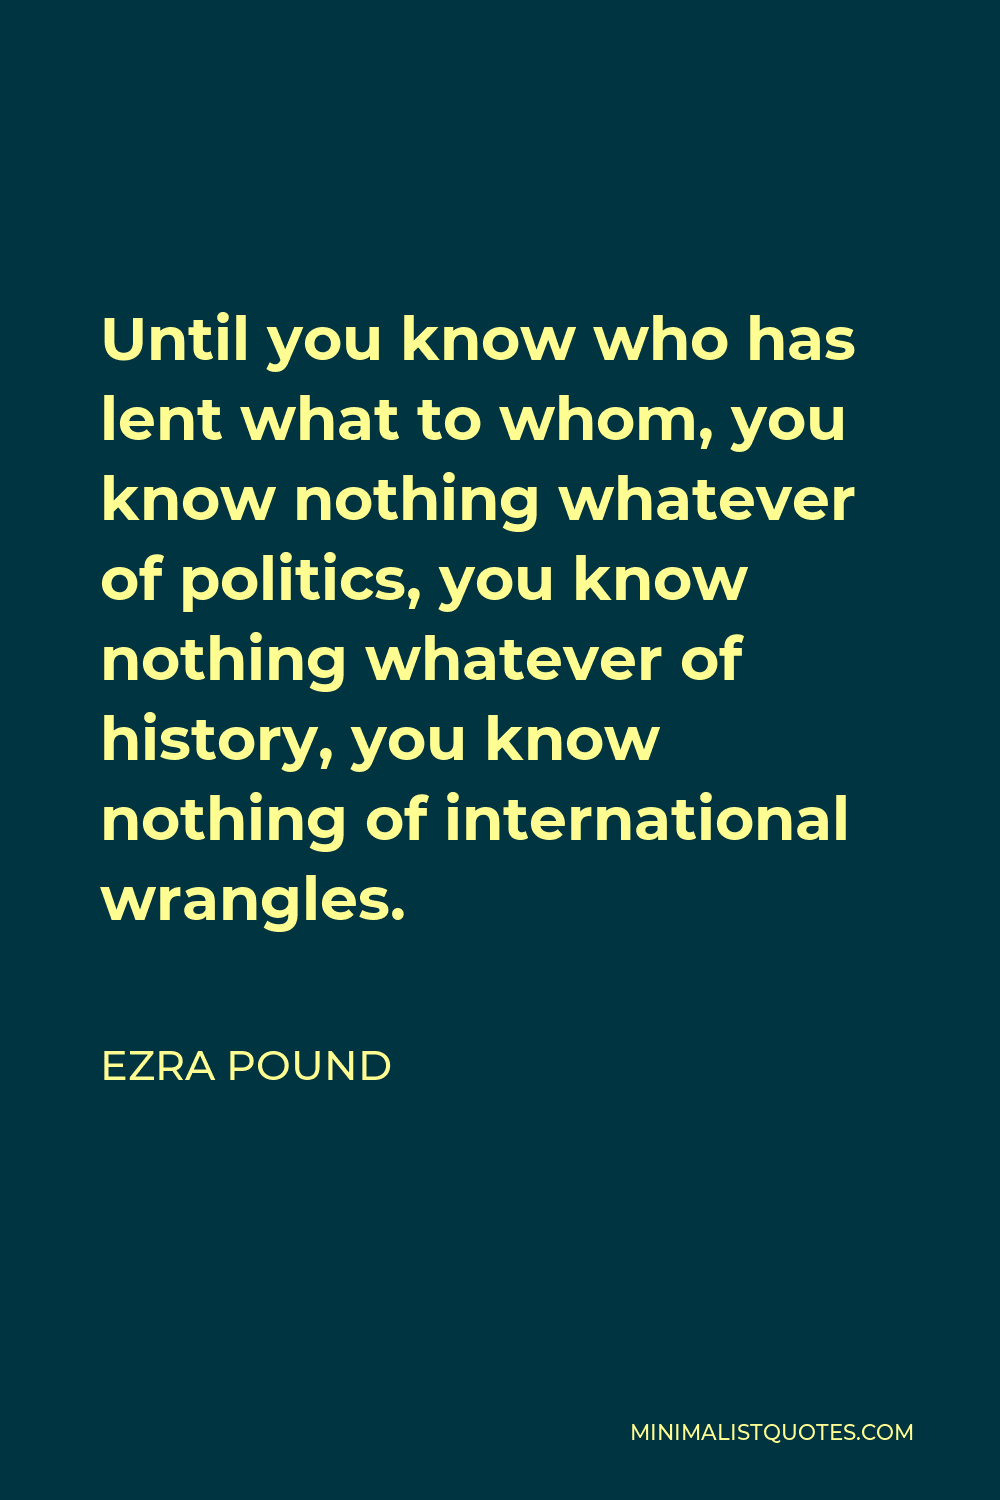 Ezra Pound Quote - Until you know who has lent what to whom, you know nothing whatever of politics, you know nothing whatever of history, you know nothing of international wrangles.